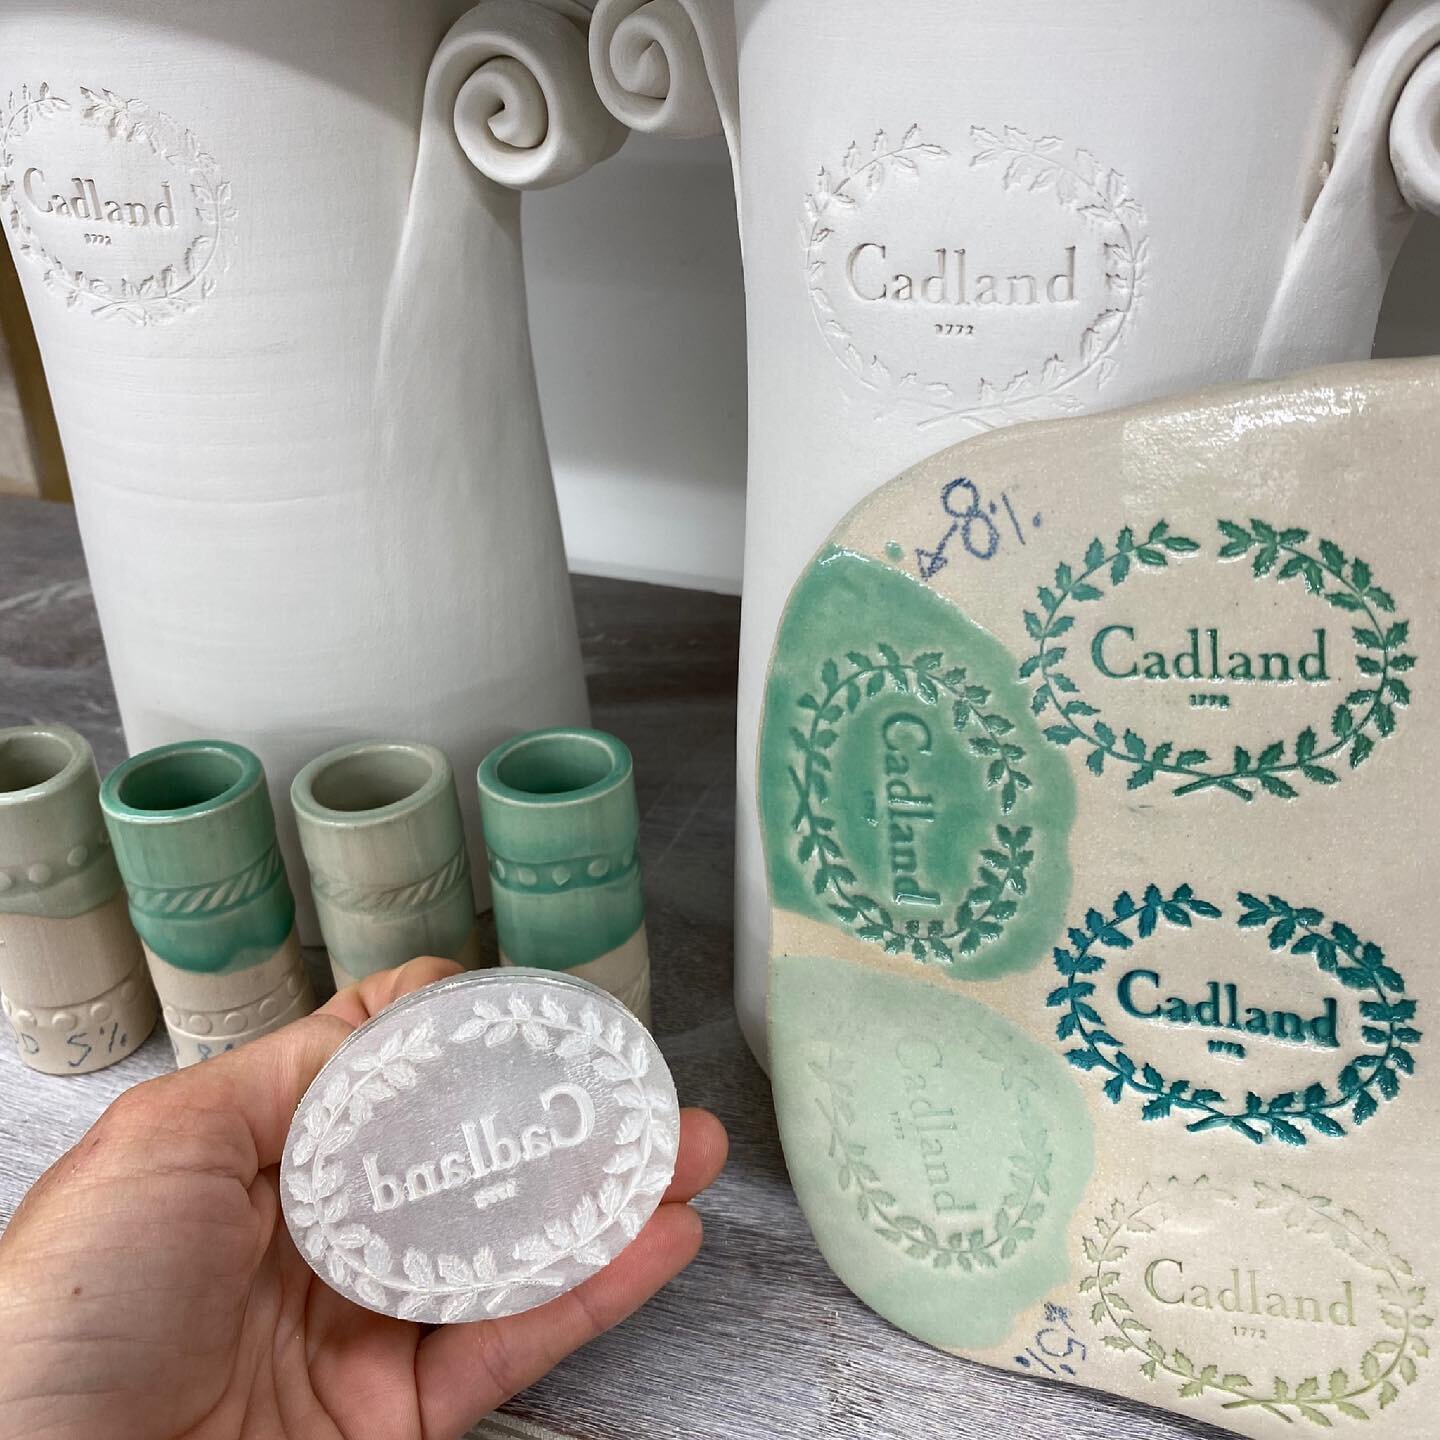 CADLAND GREEN &hellip; It has taken some perfection and patience to get our perfect green! A thrill to create, watch and wait whilst creating this collection of hand thrown Stoneware to match our mantra &lsquo; From the Woods to the Sea &lsquo;. Stay